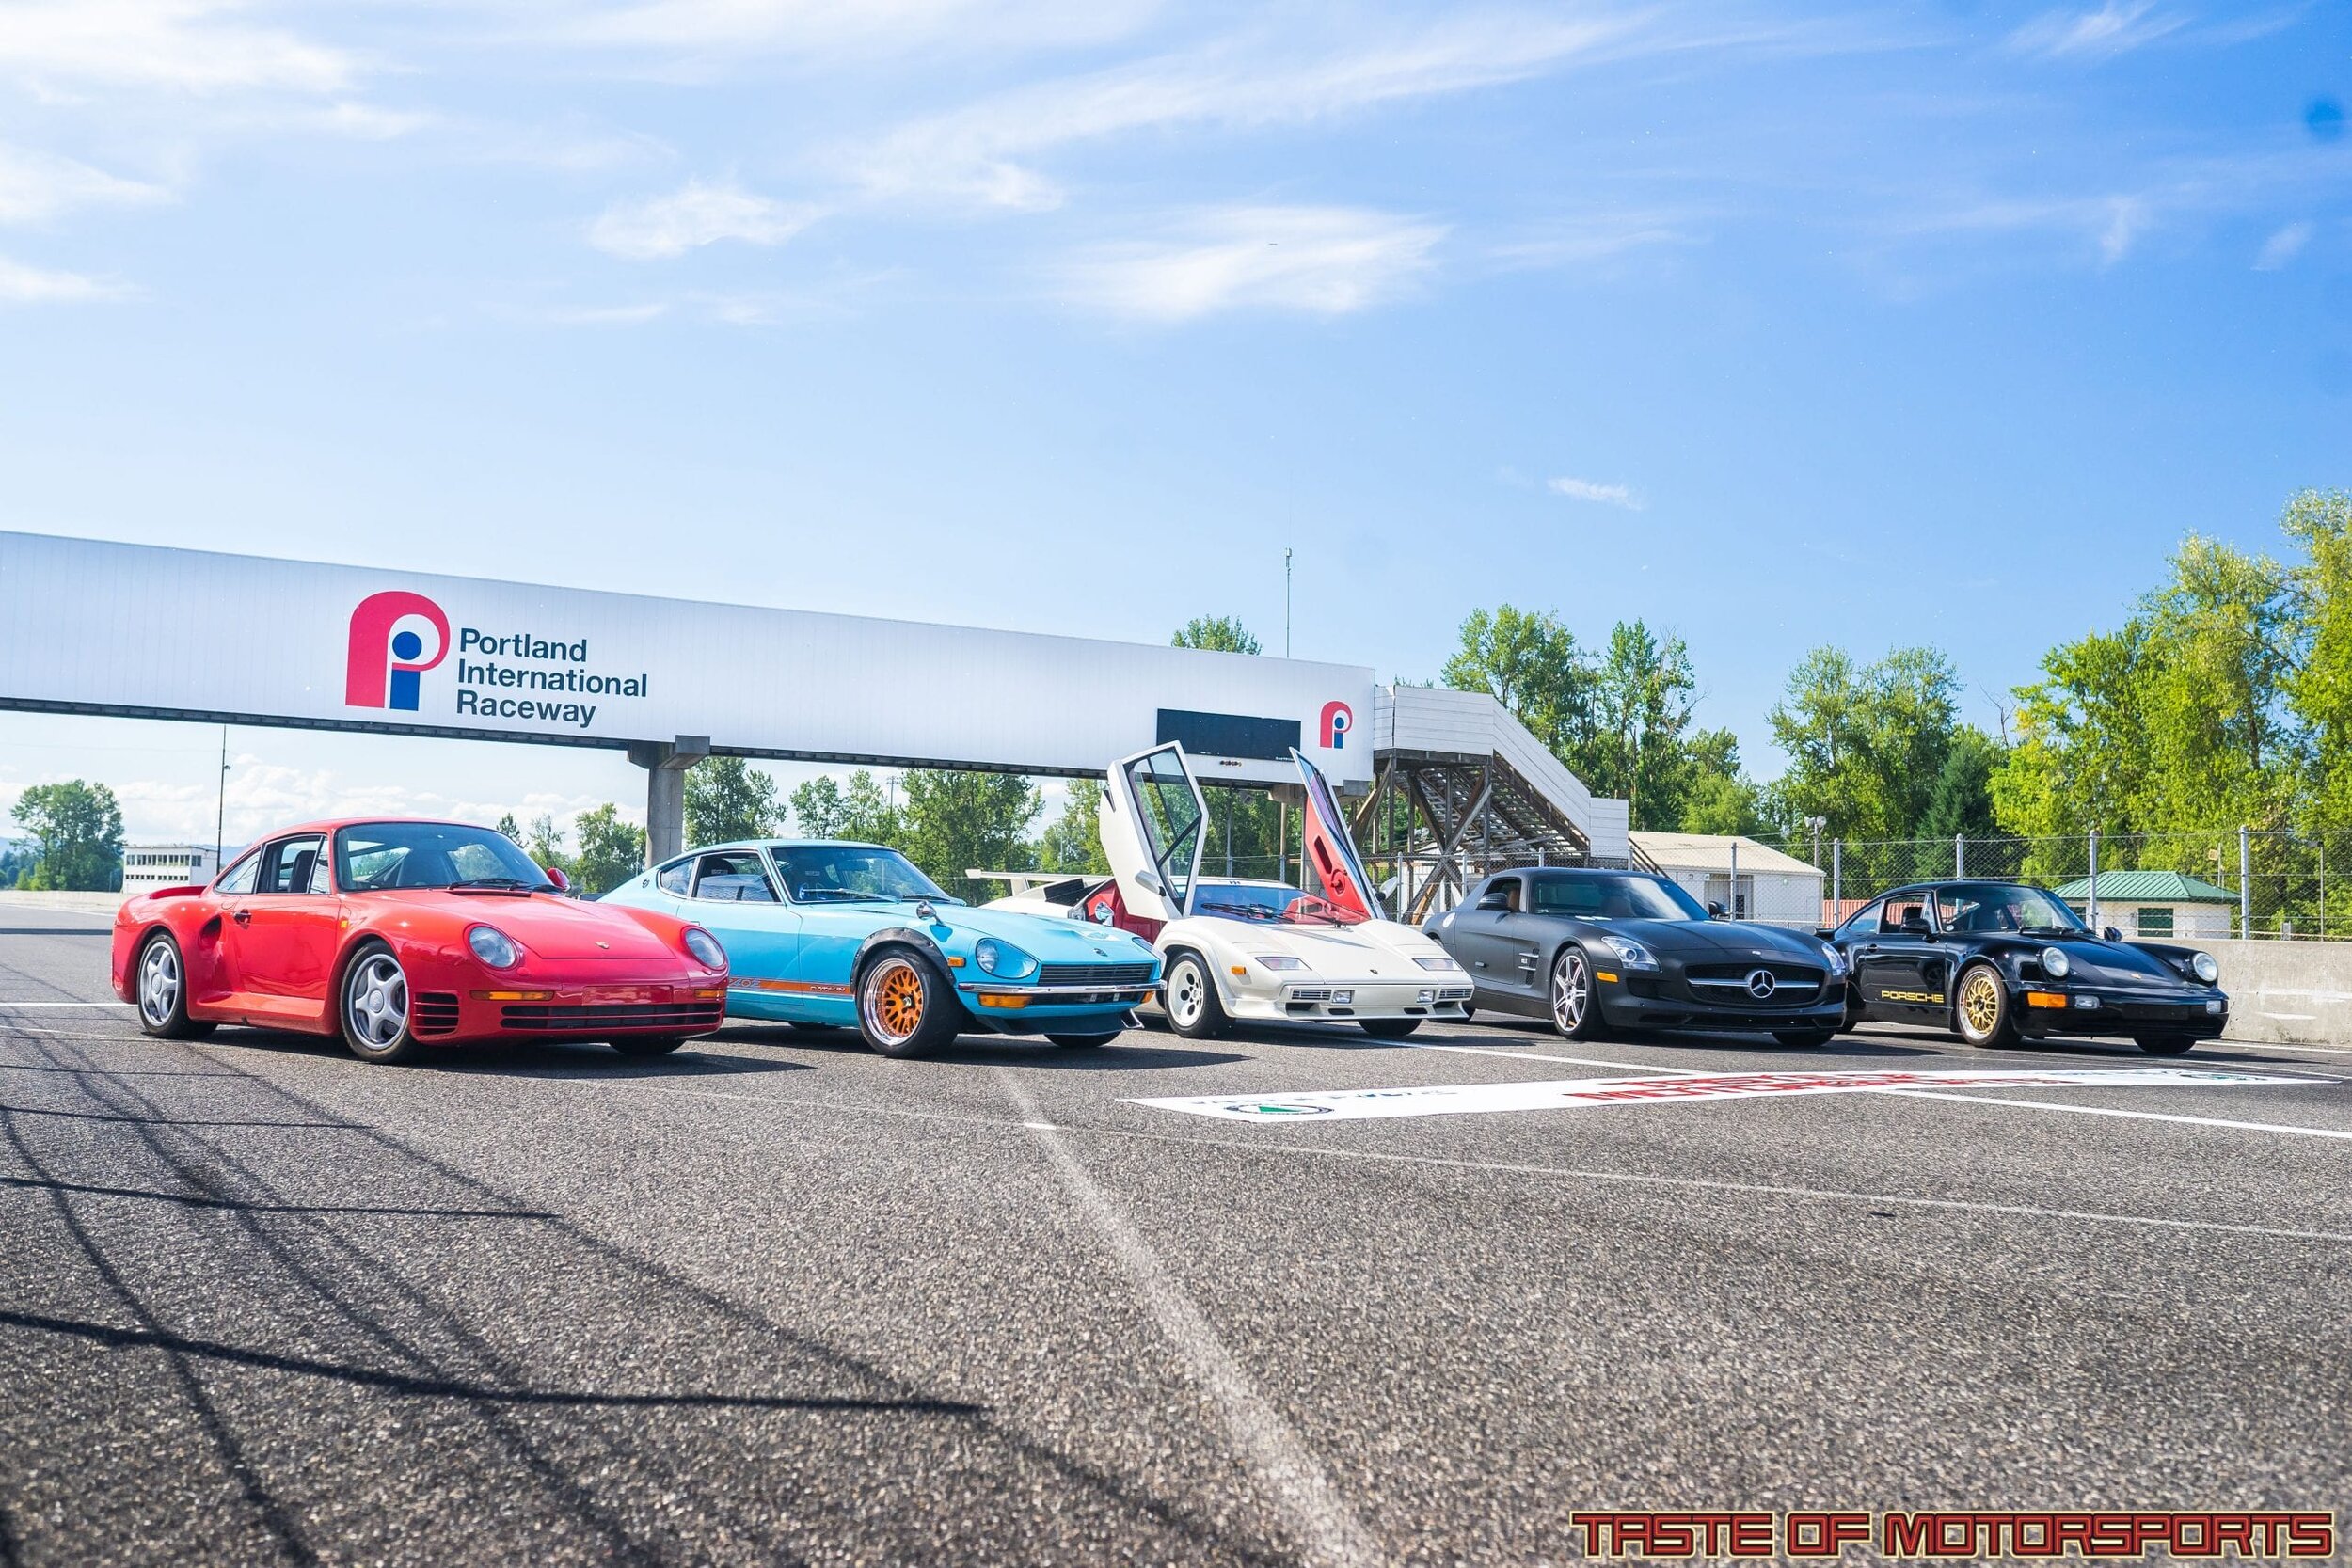 6th Annual Taste of Motorsports Experience